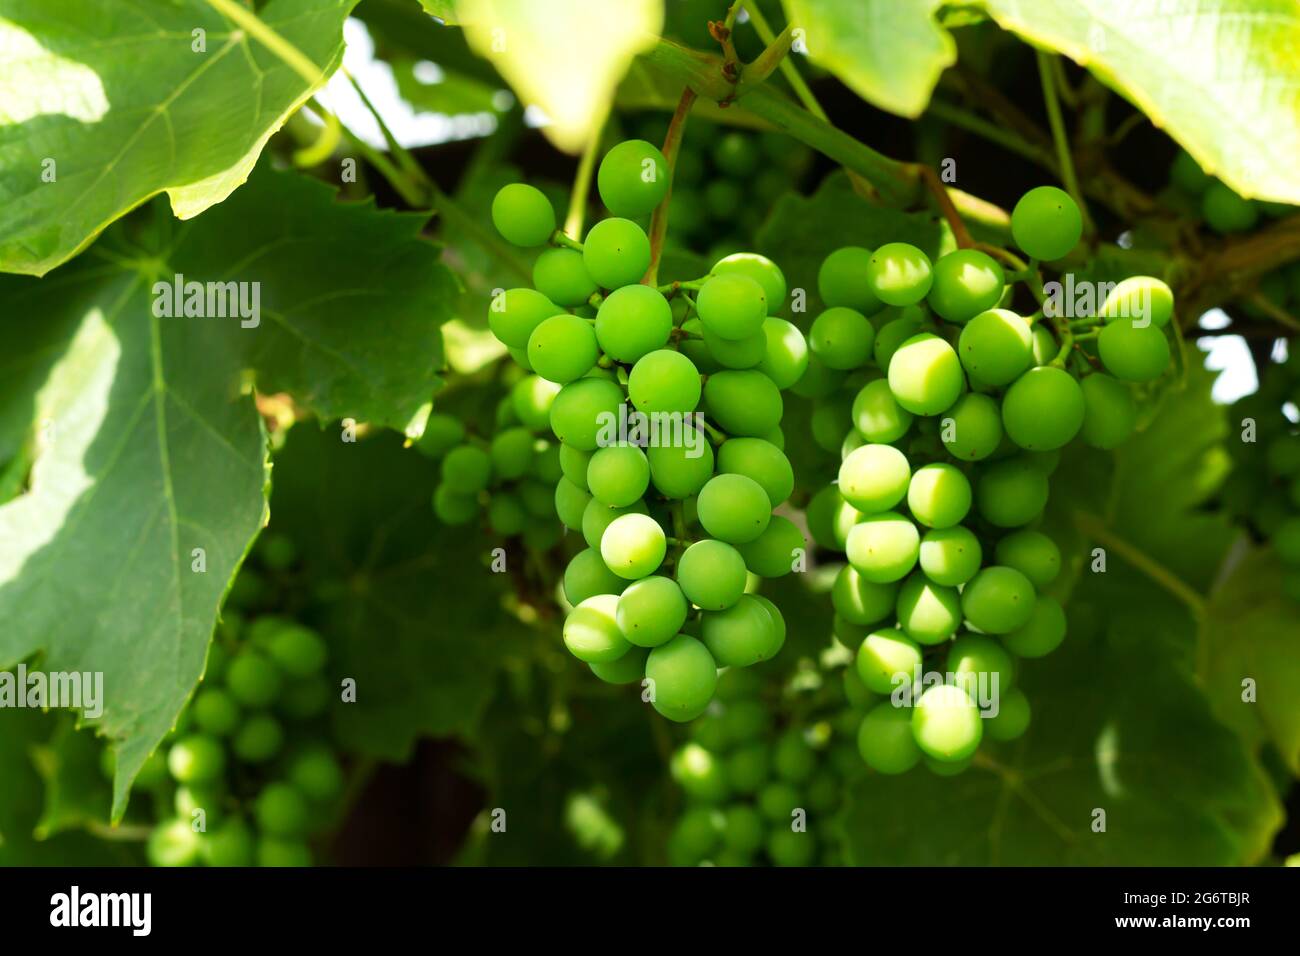 Grape vine with green grapes growing in organic vineyard Stock Photo